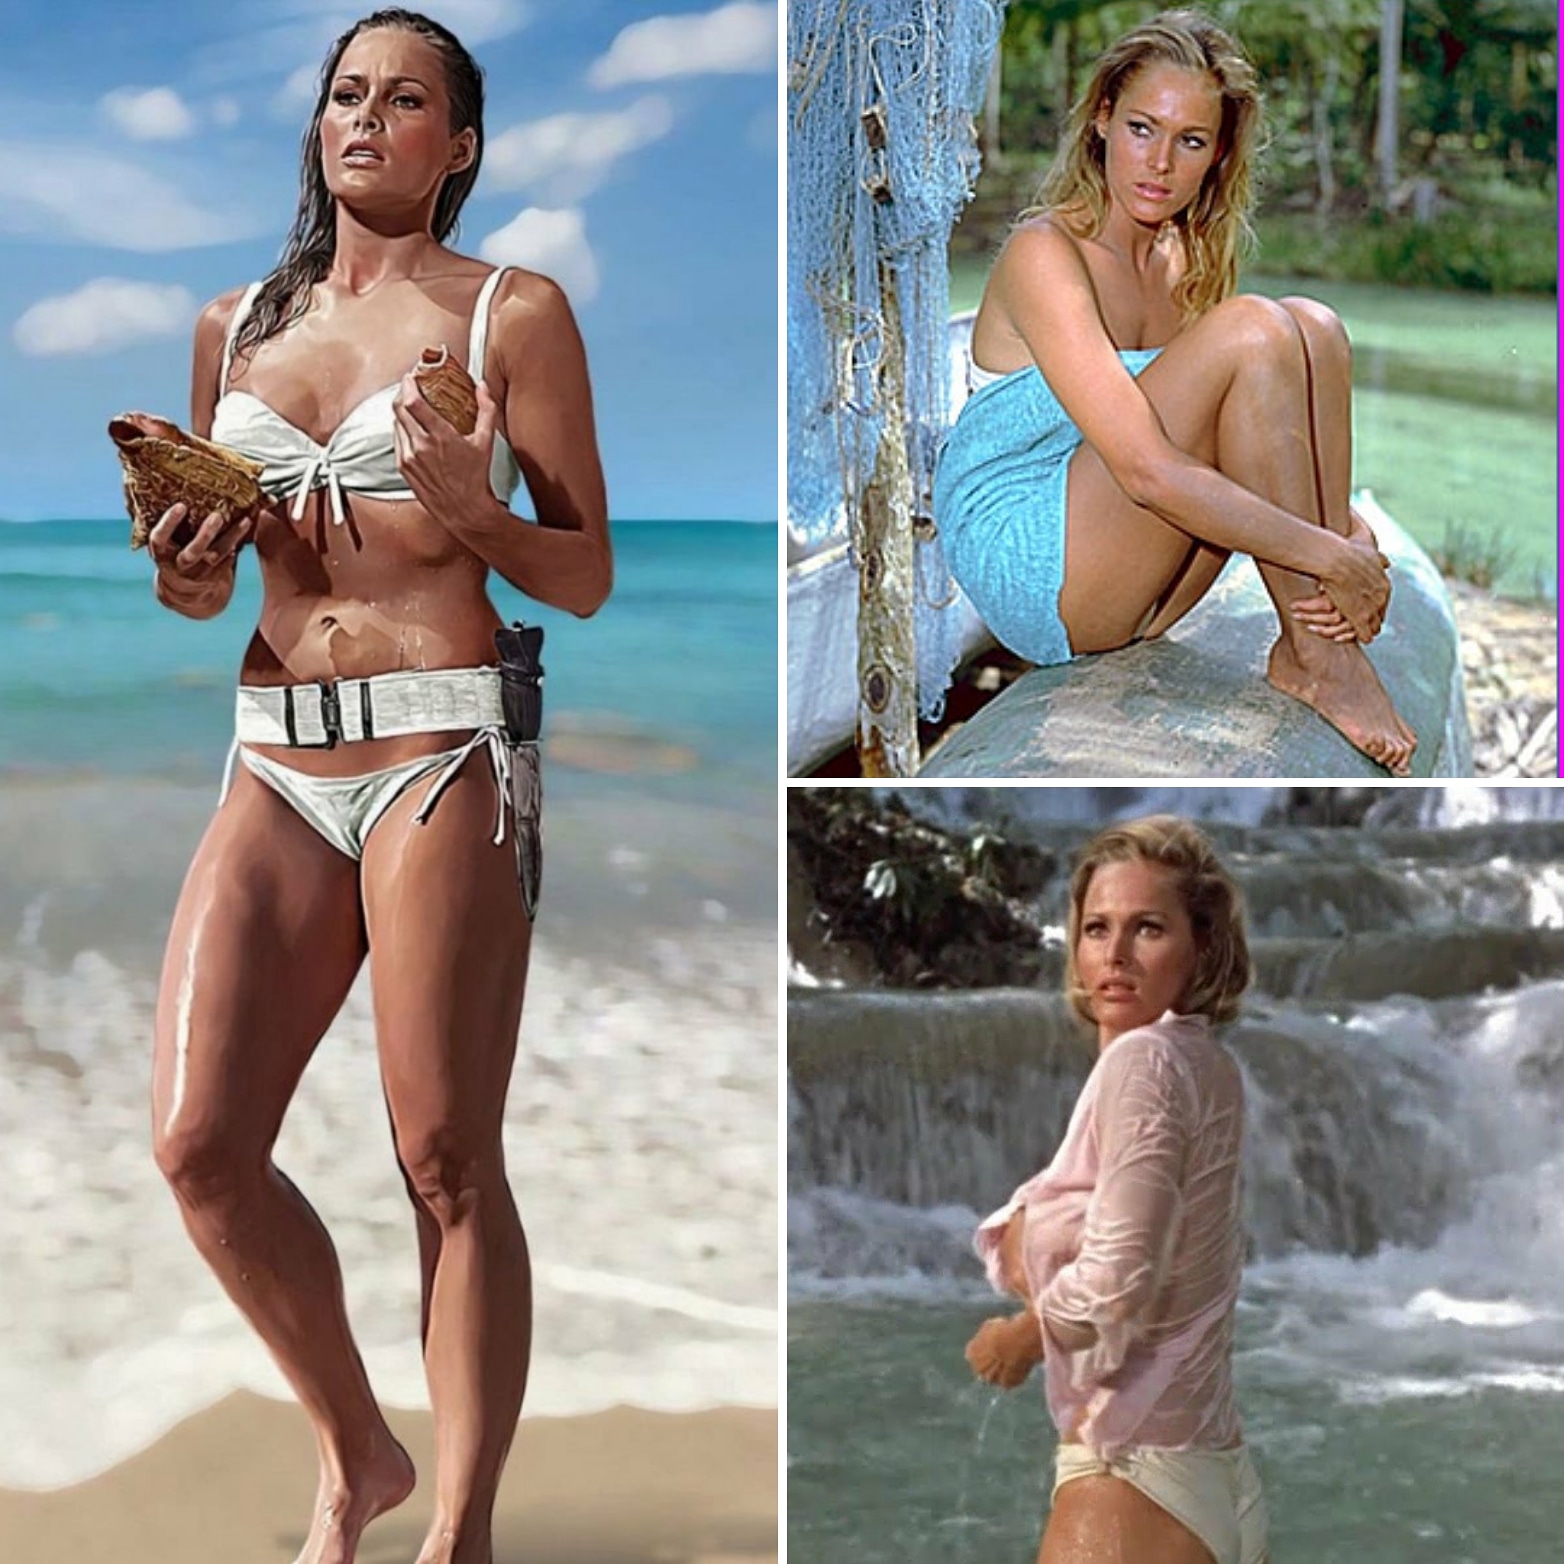 Happy birthday to Ursula Andress who played the quintessential heroine Honey Rider in Dr No (1962) 